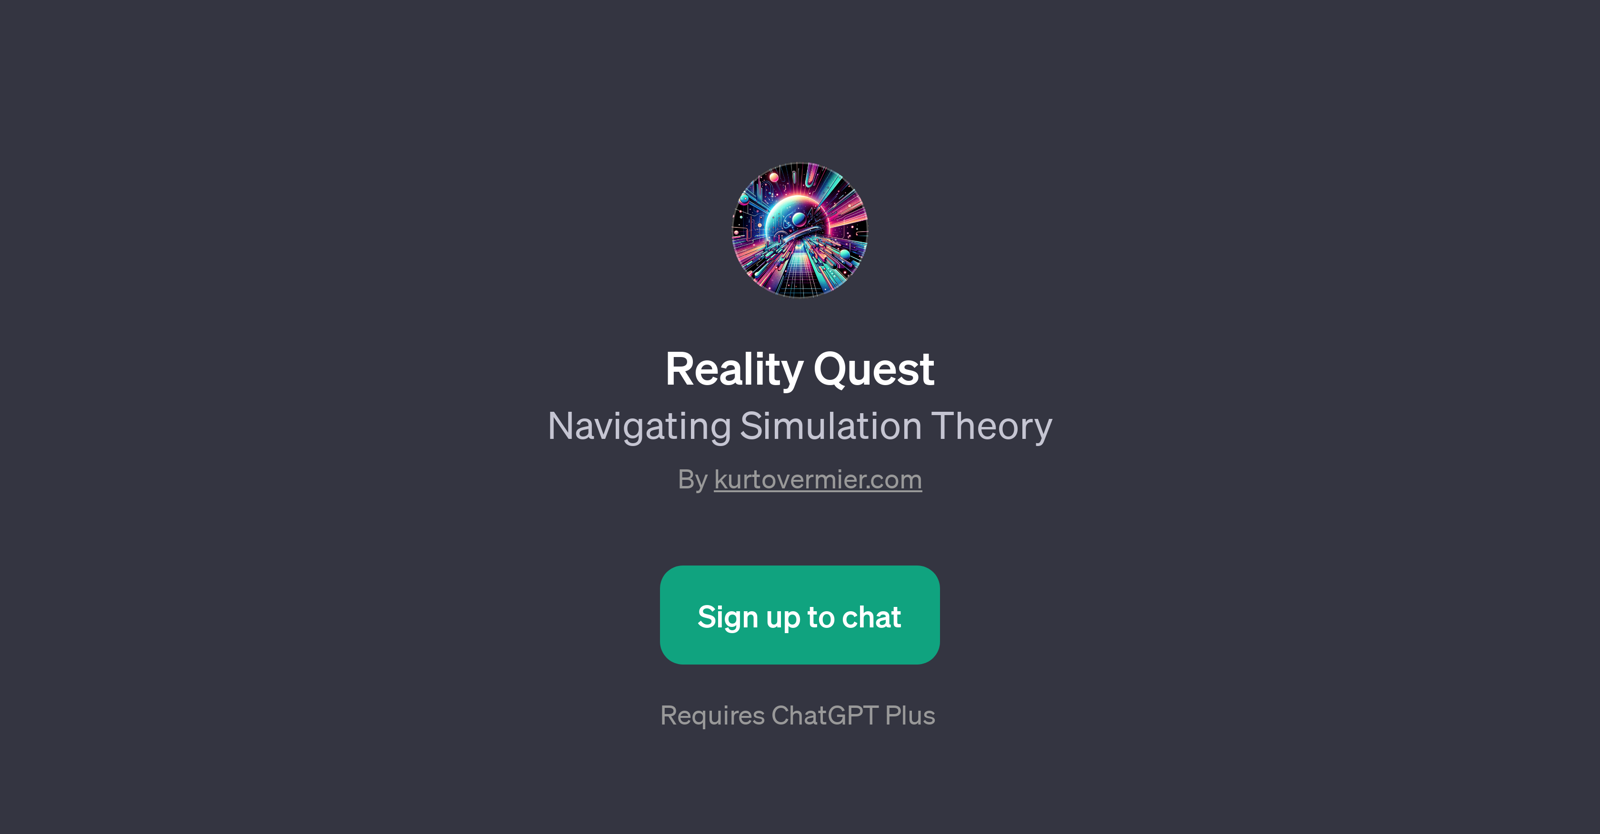 Reality Quest website